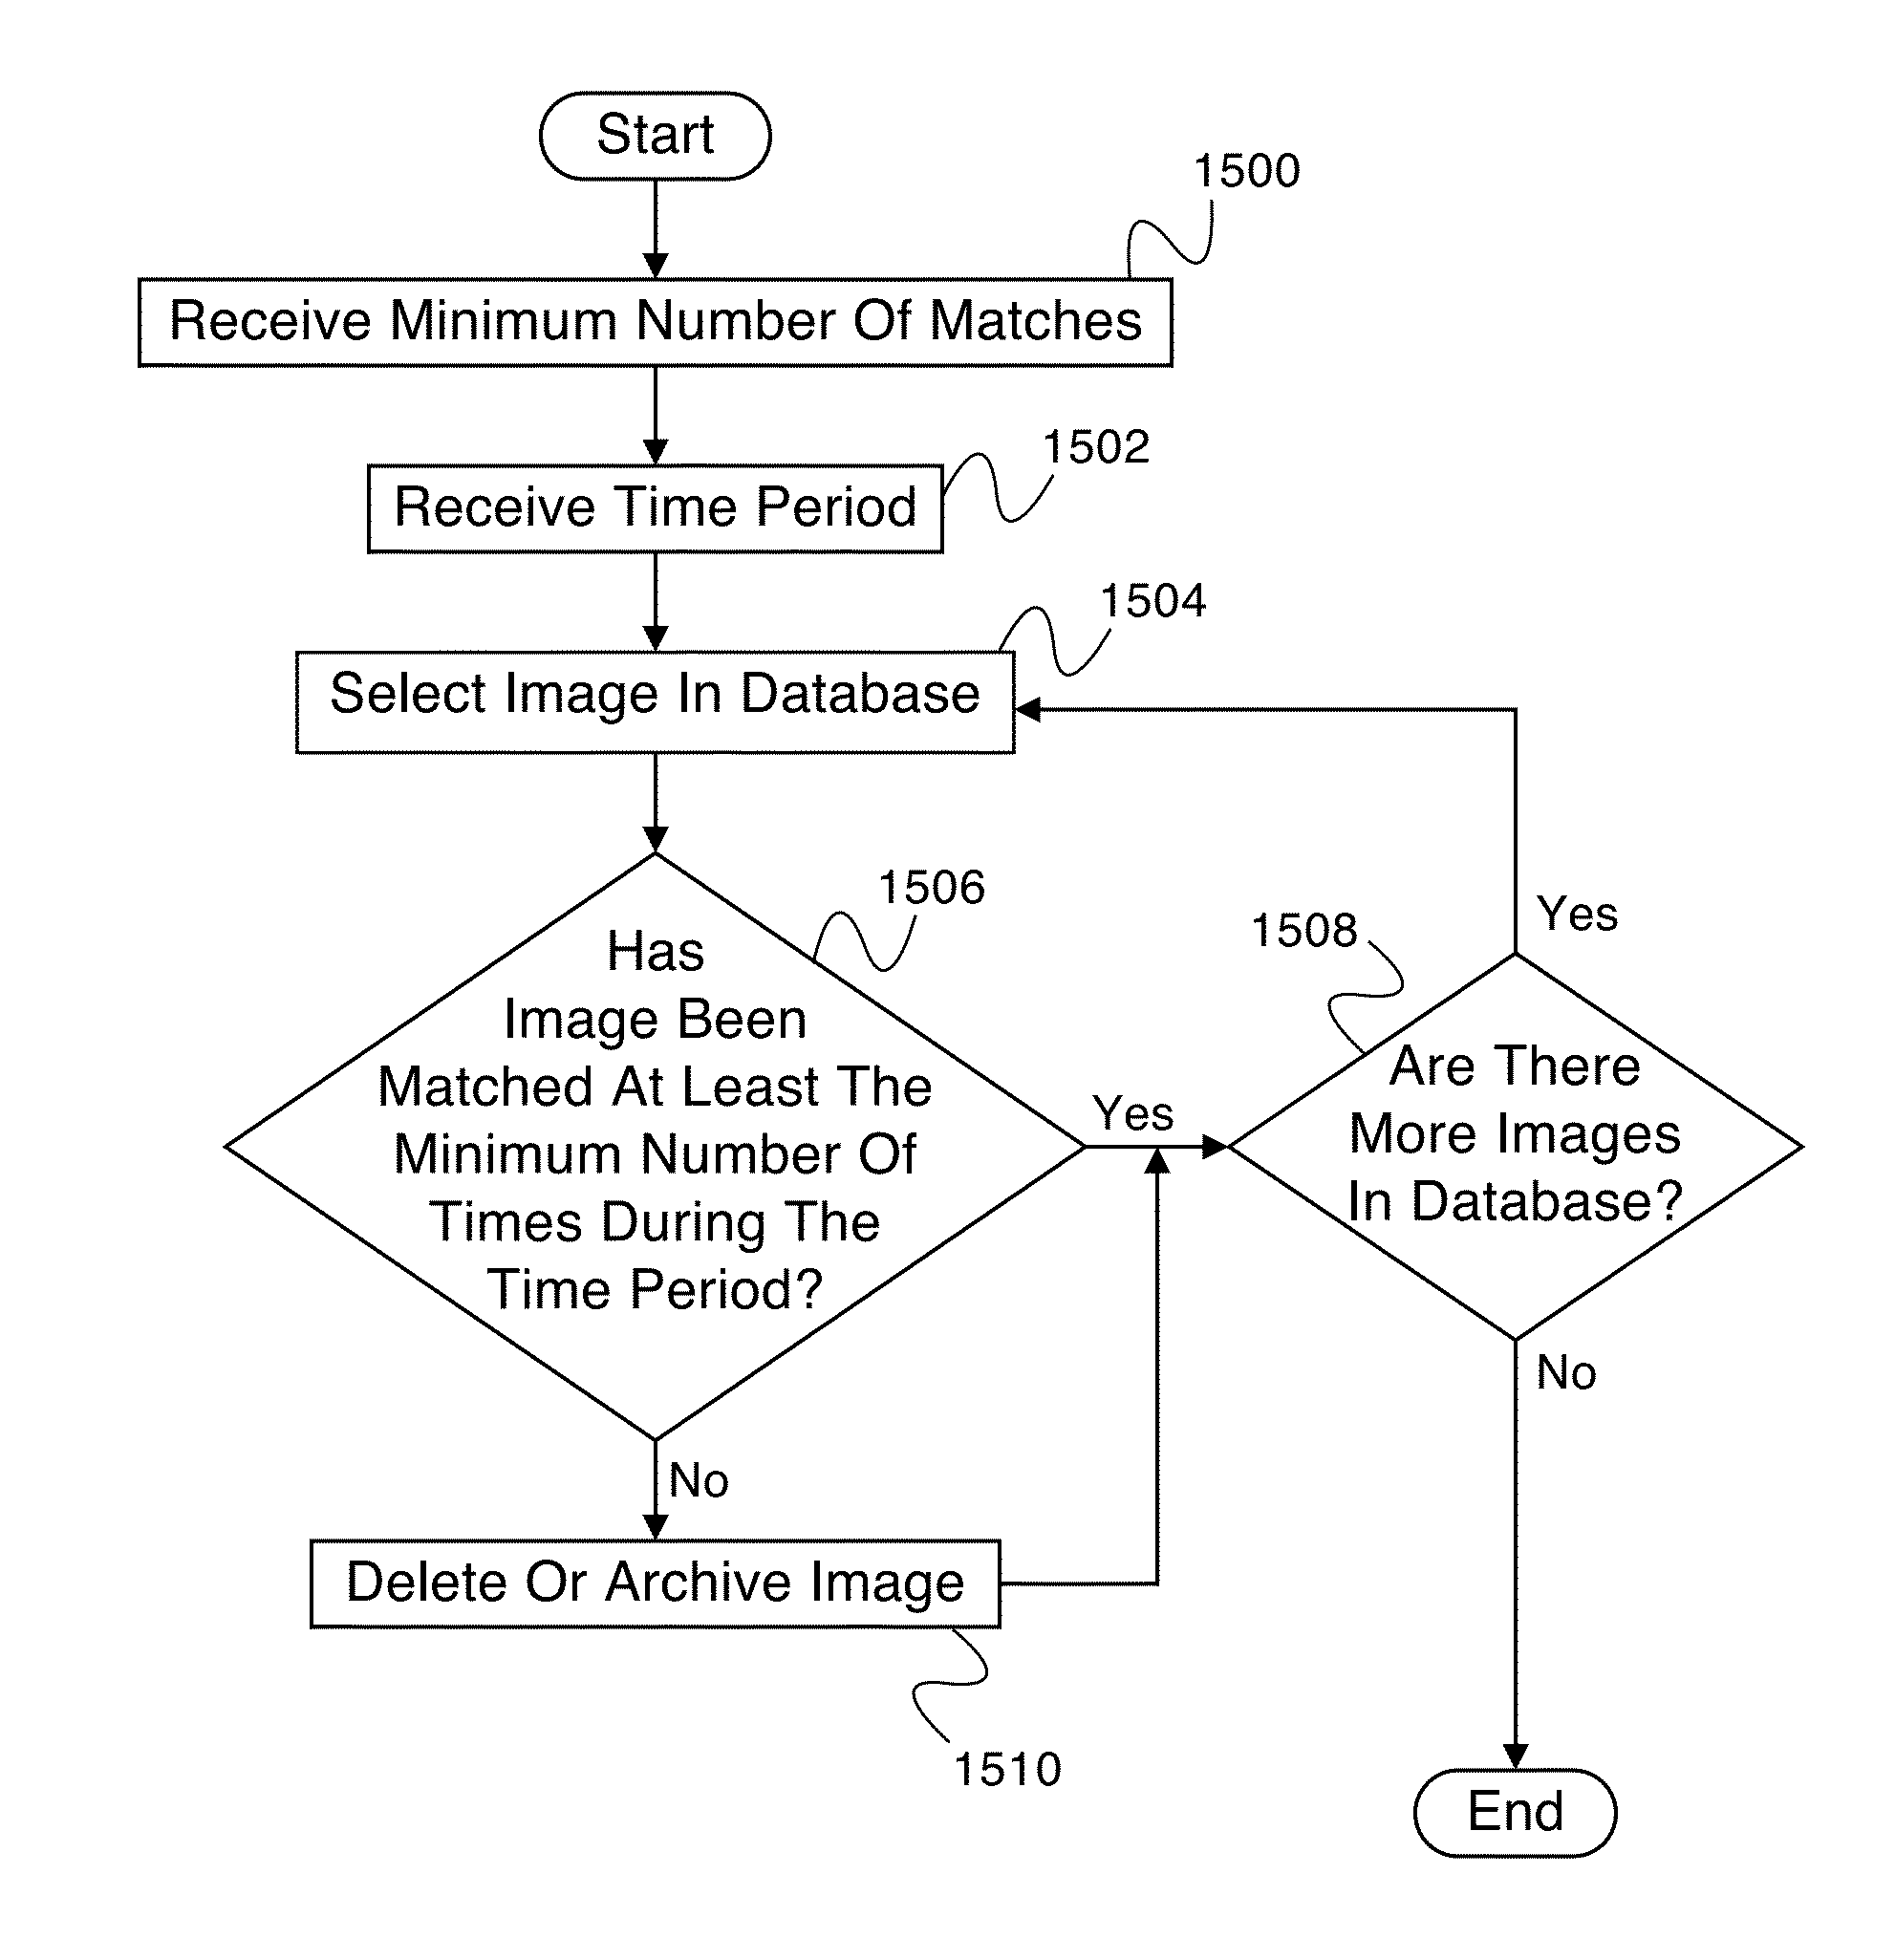 Monitoring an any-image labeling engine